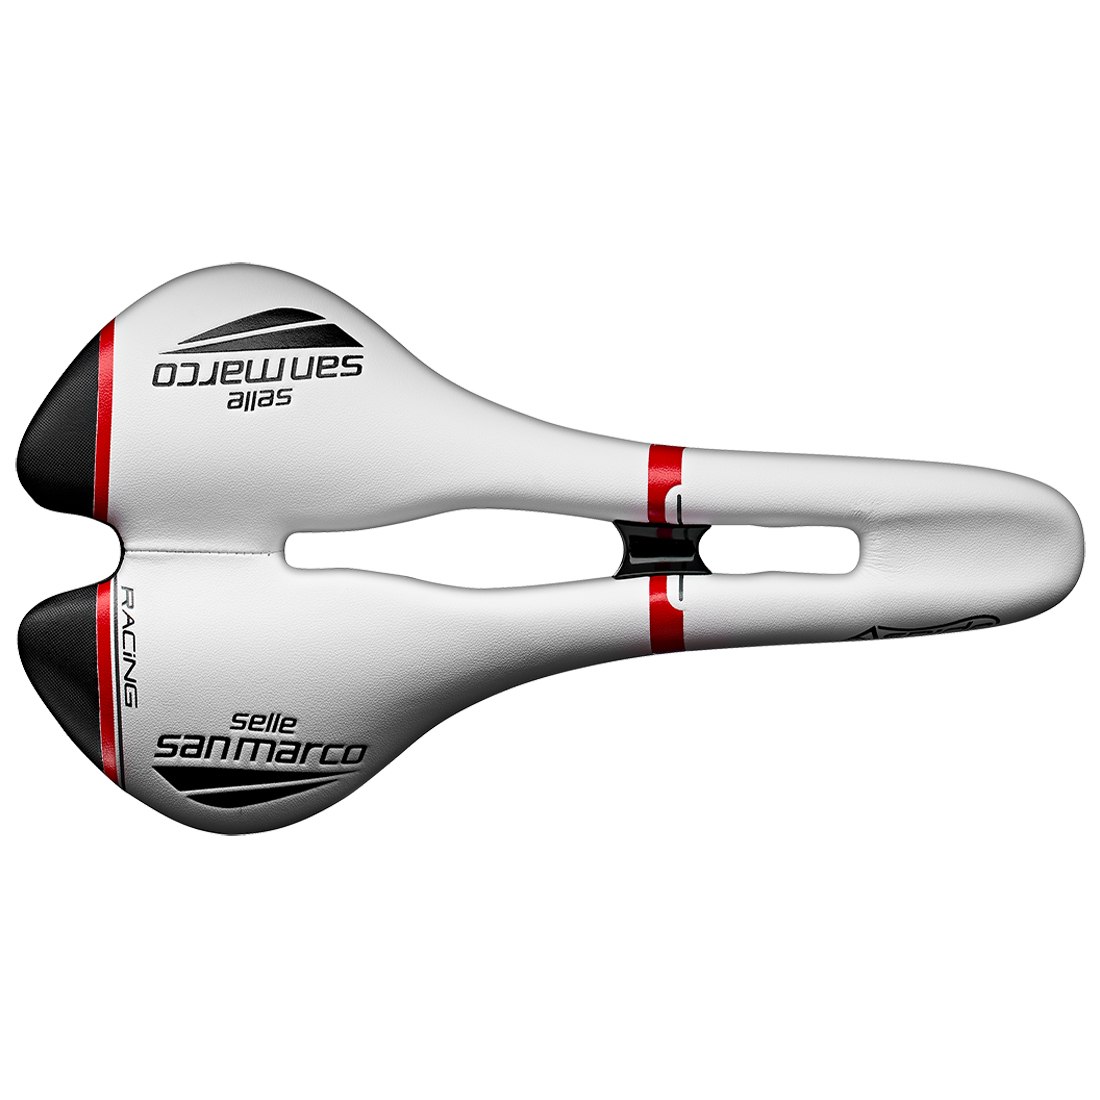 Productfoto van Selle San Marco Aspide Racing Open-Fit Saddle - Narrow S2 - red/white